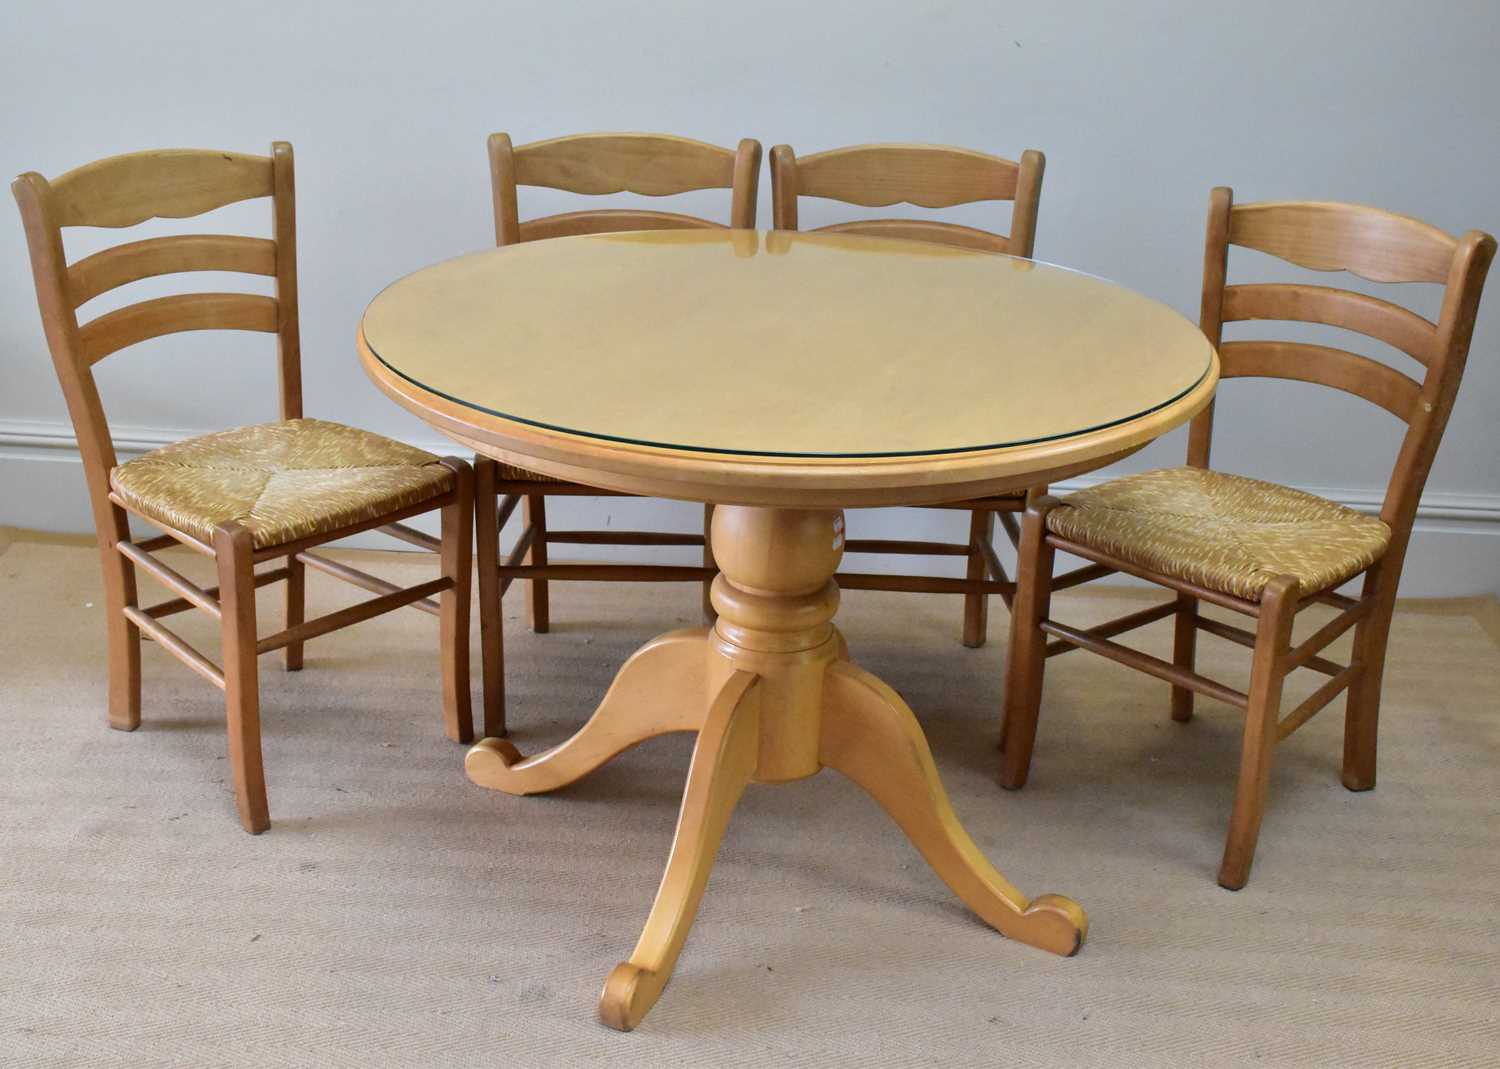 A modern kitchen table with four rush seated chairs.